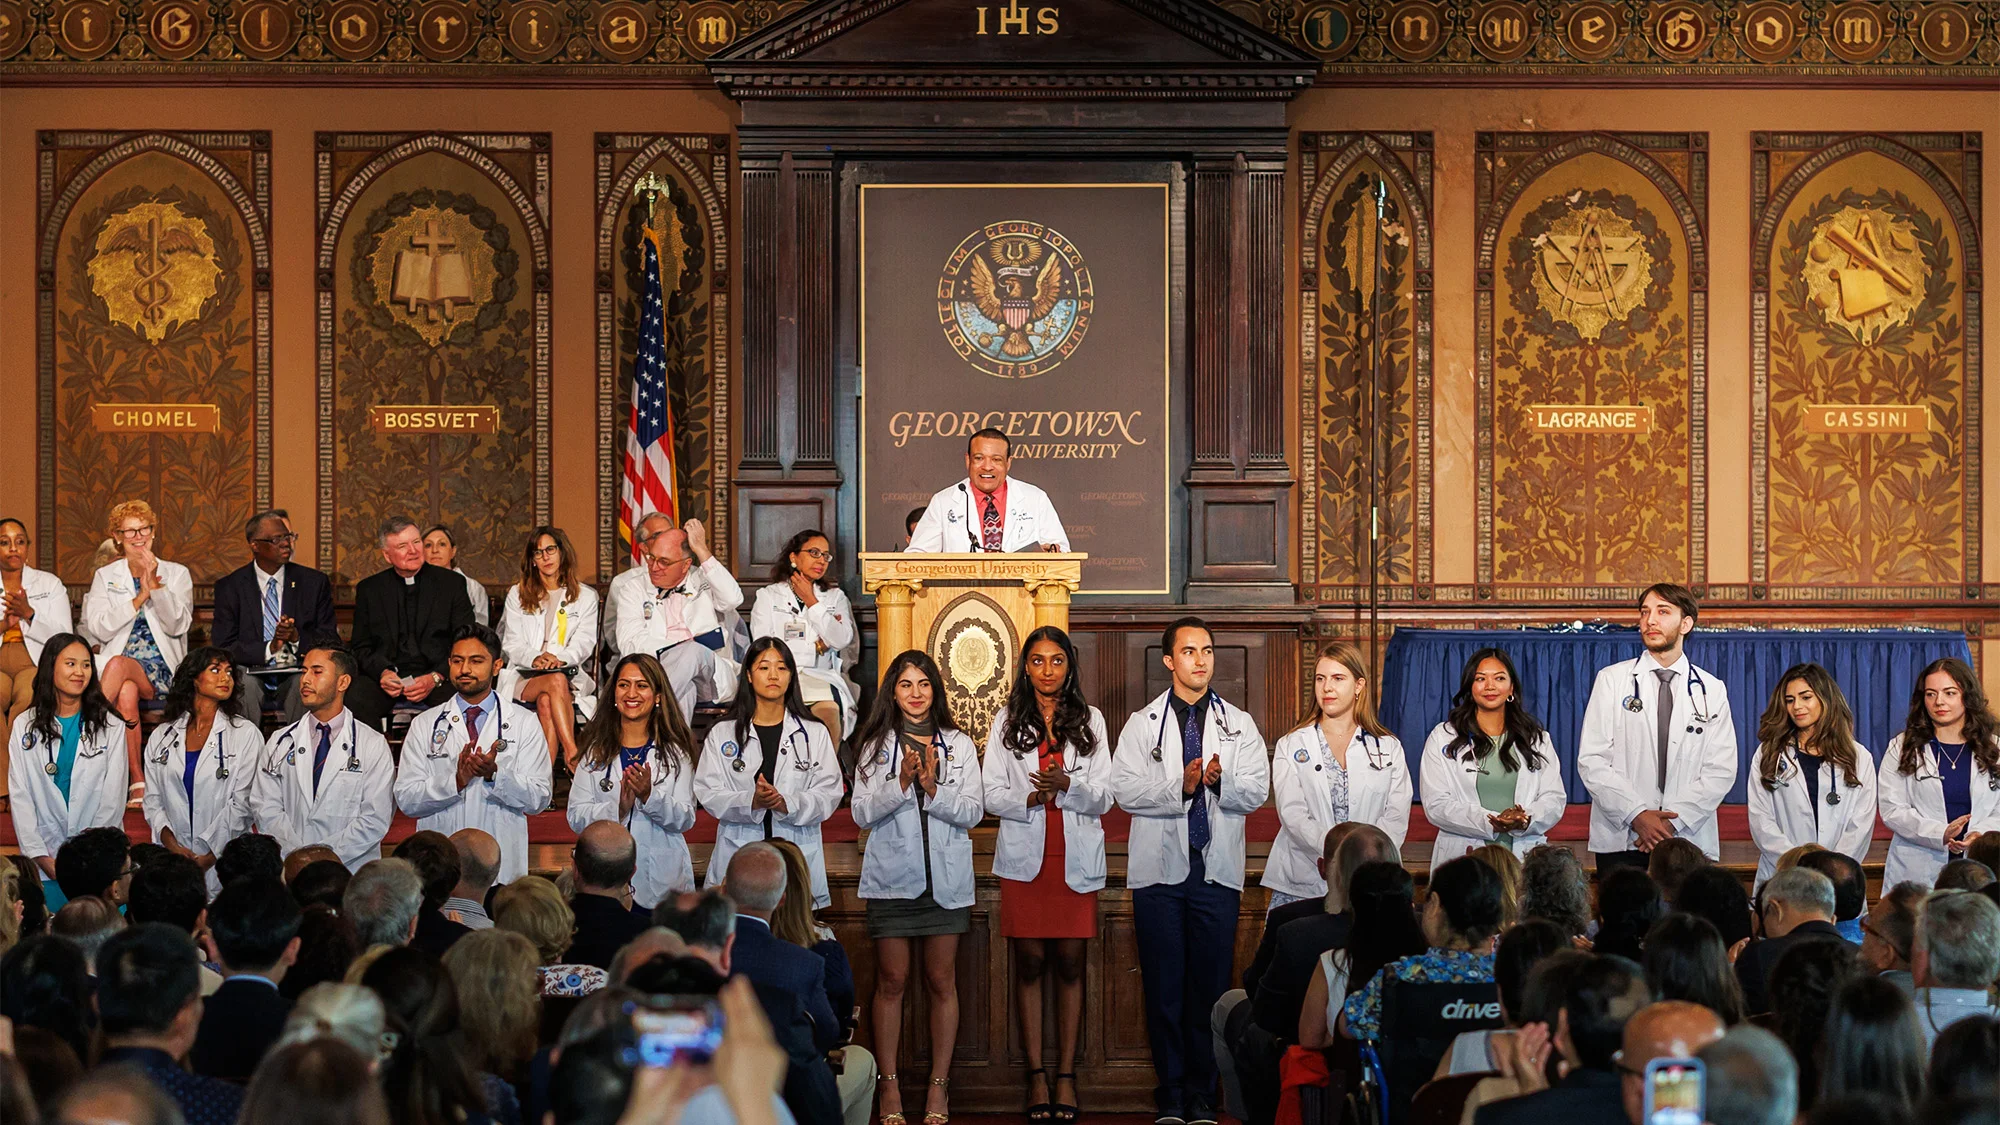 Students in white coats in a well-lit hall.